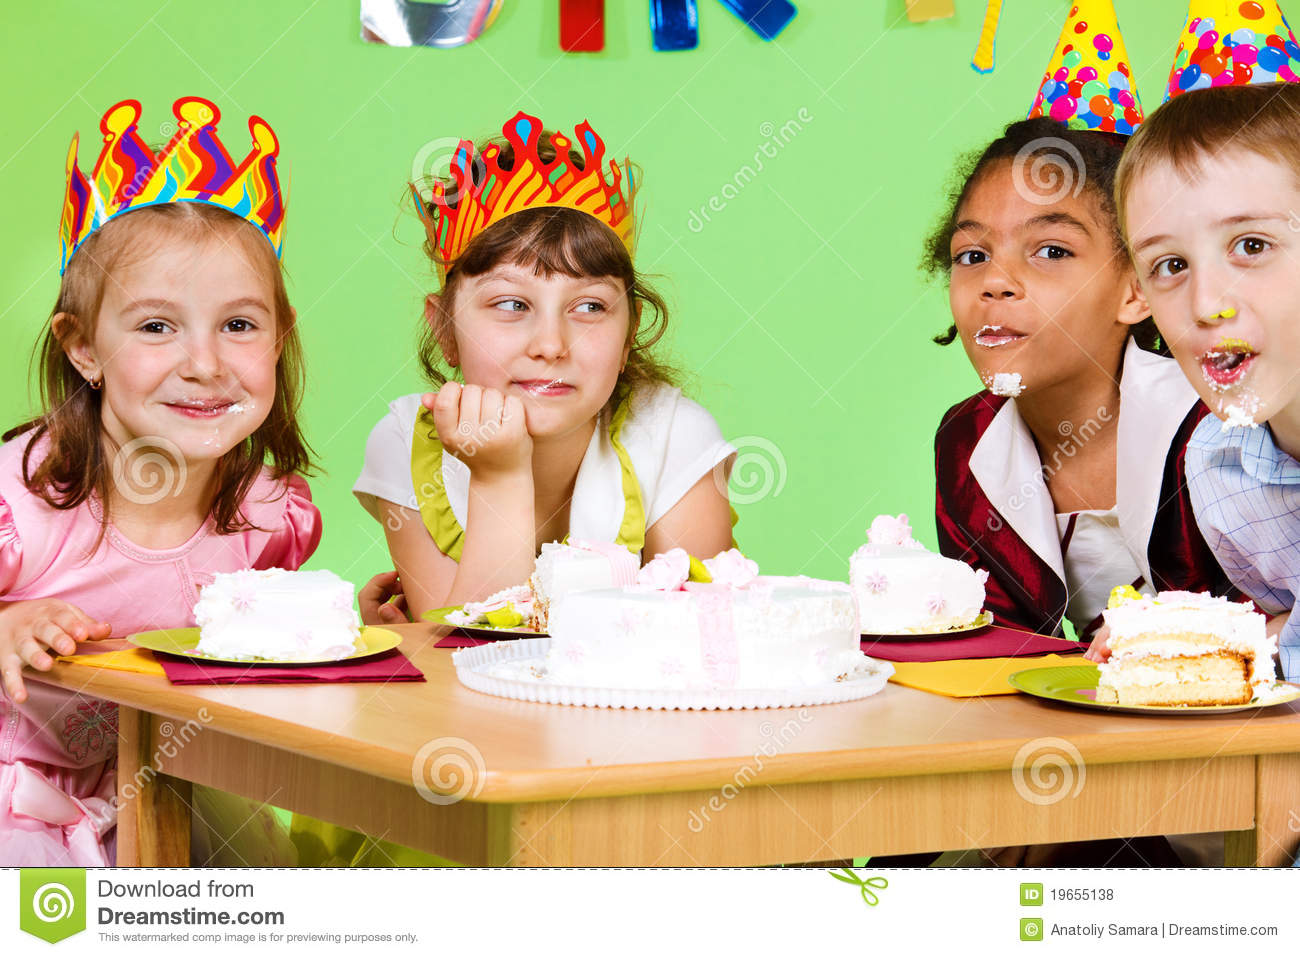 Cake Eating Contest Royalty Free Stock Photos   Image  19655138